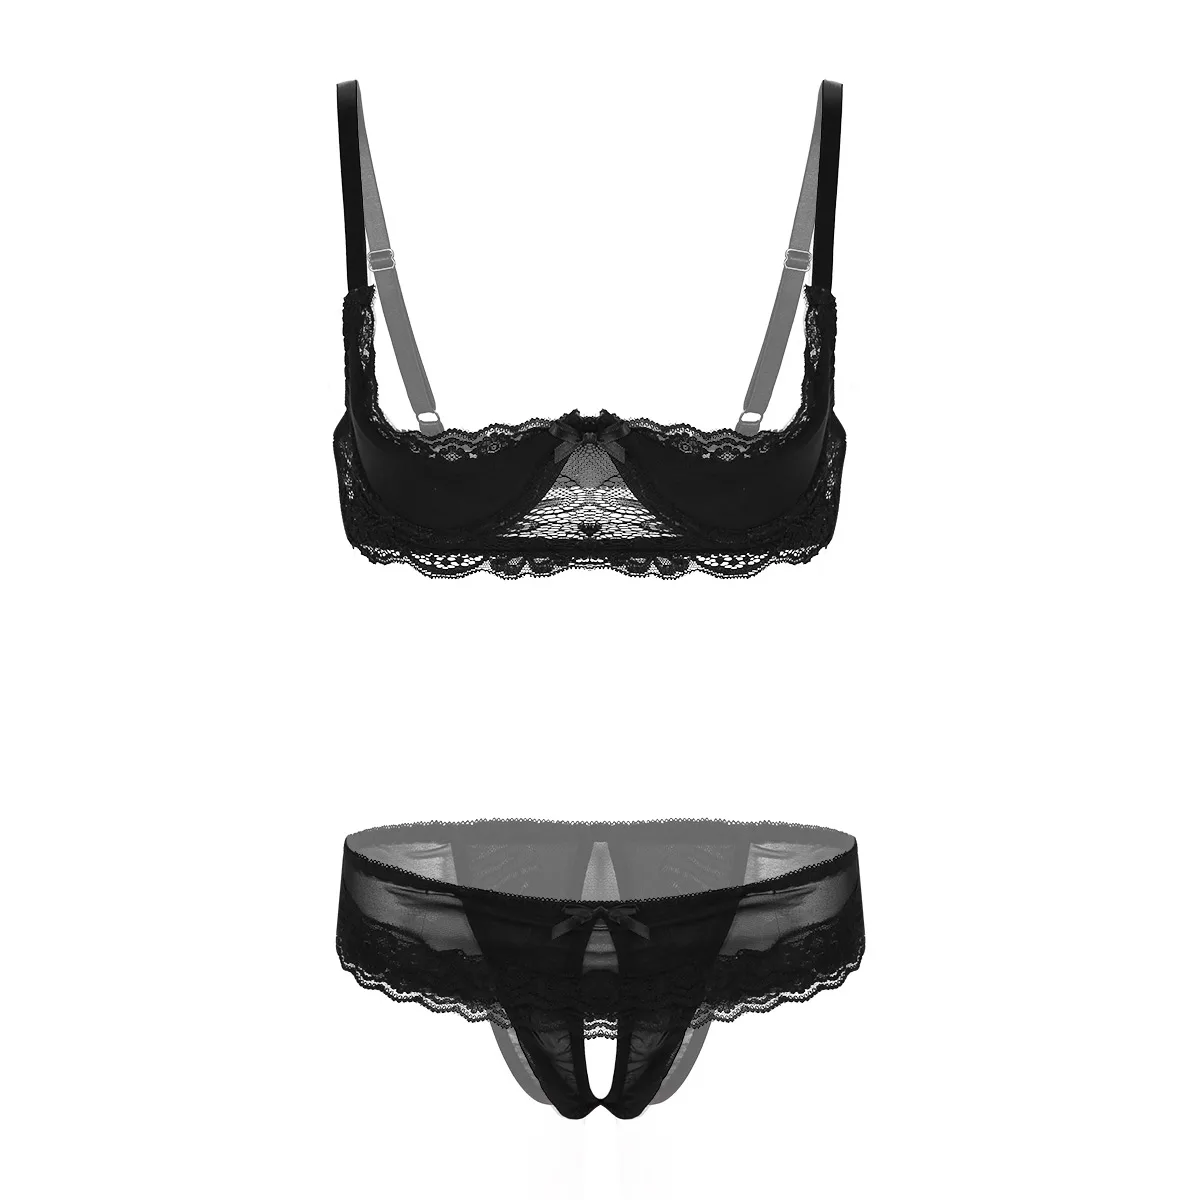 

Porno Womens Ladies Lace Lingerie Set Sexy Open Cup Unlined Shelf Bra with Panty Open Crotchless Thong Low Rise Briefs Underwear